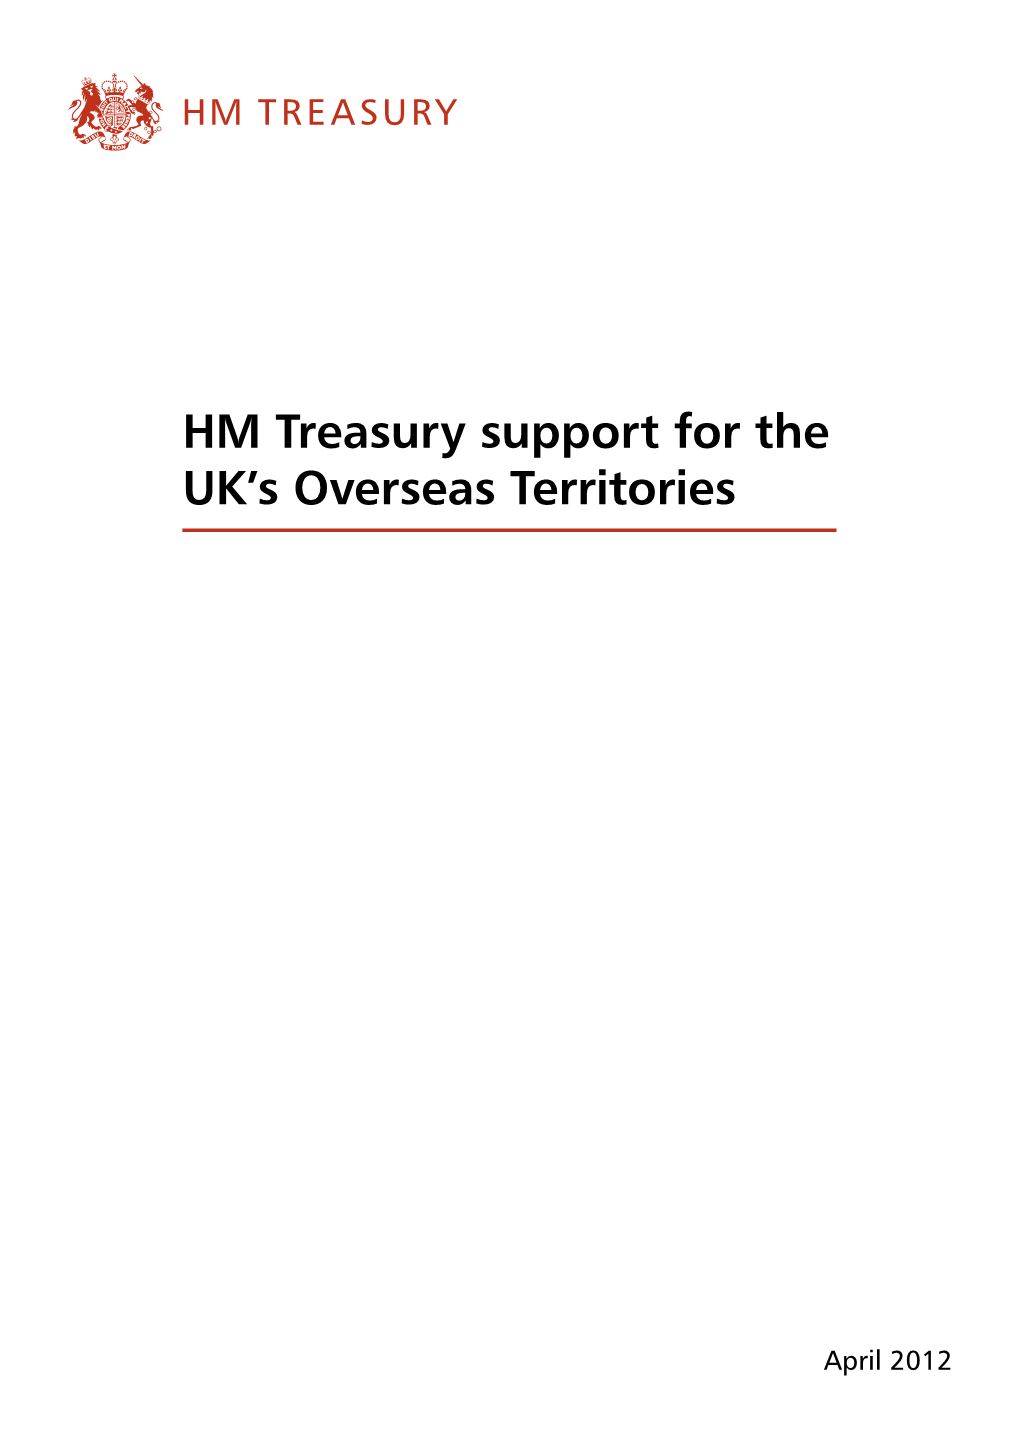 HM Treasury Support for the UK's Overseas Territories